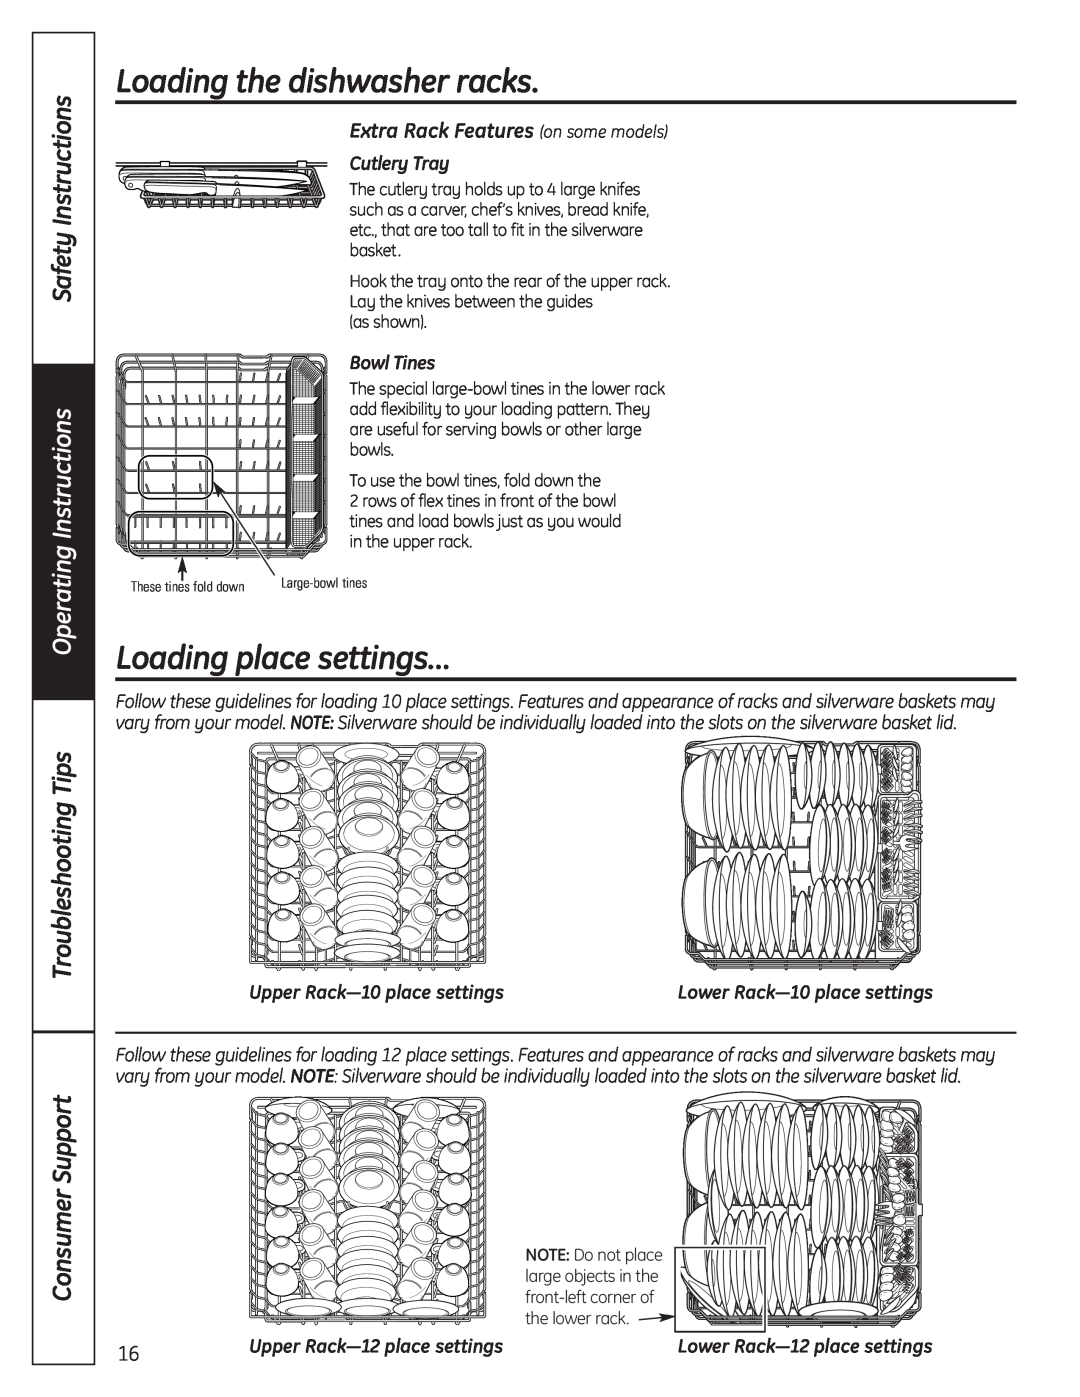 GE 165D4700P389 49-55065 07-09 JR Loading place settings…, Extra Rack Features on some models, Cutlery Tray, Bowl Tines 